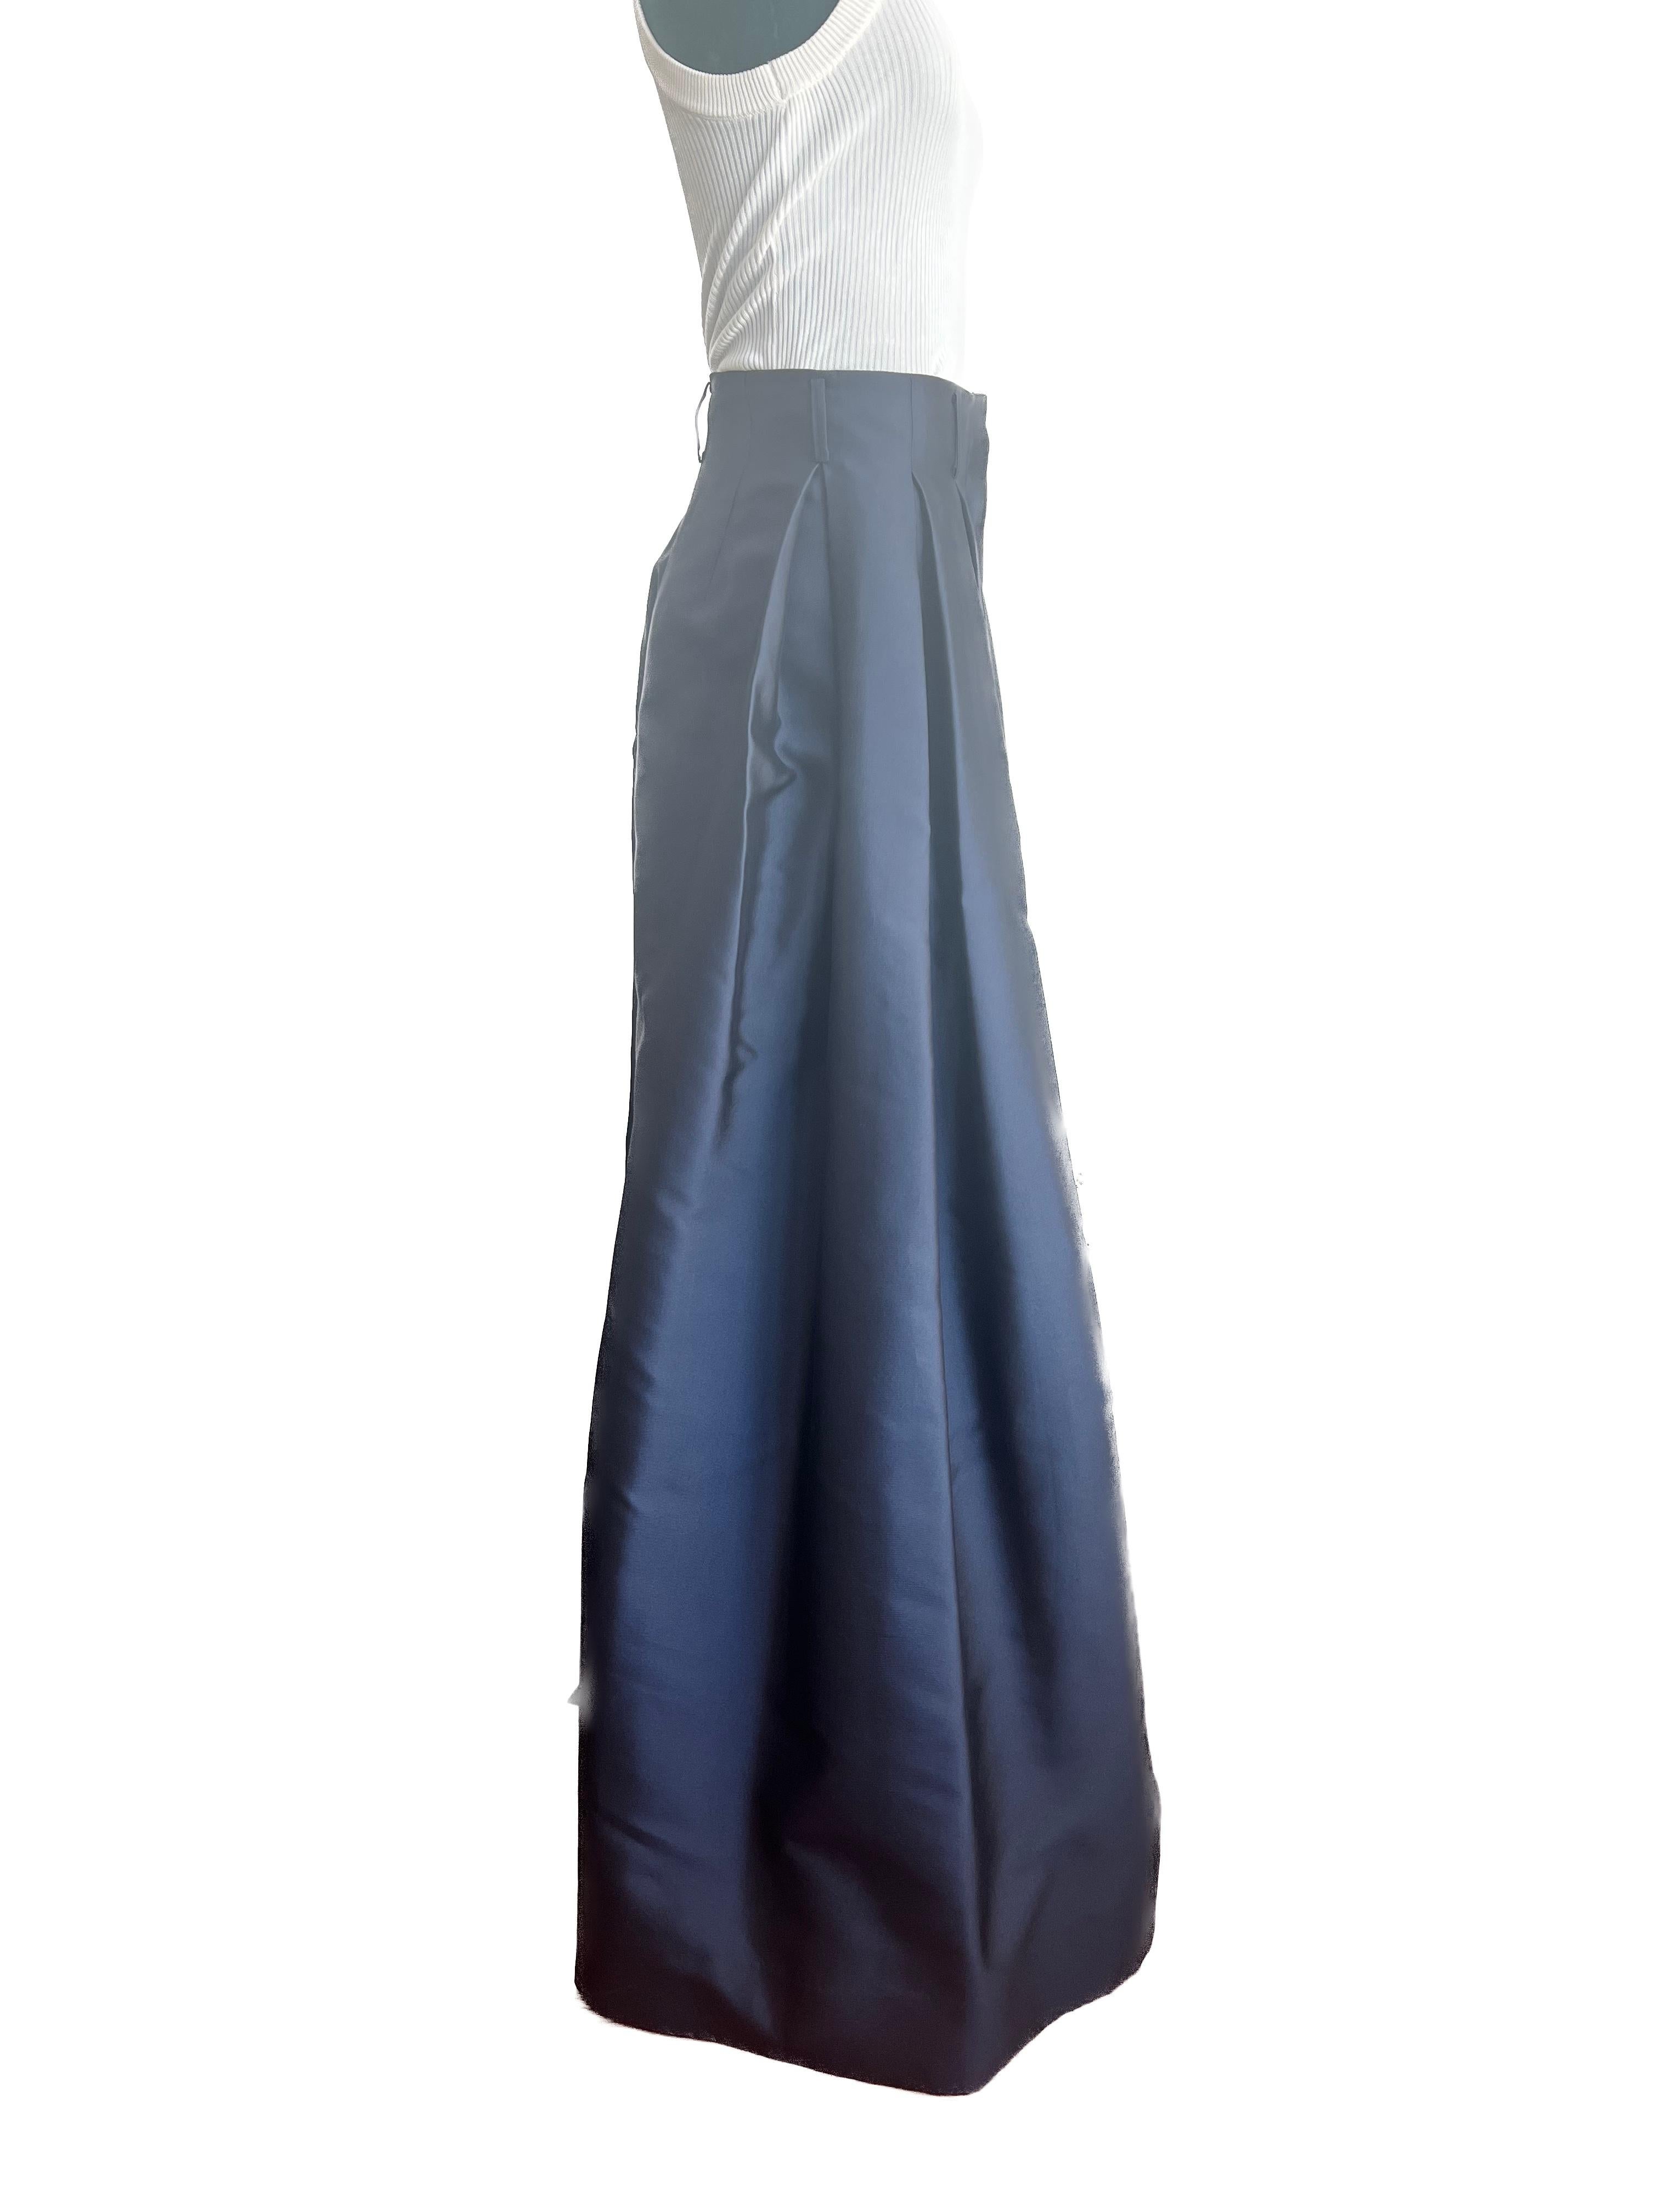 Drape yourself in refined elegance with The Row's Silk Navy Wide Pant, a luxurious embodiment of sophisticated minimalism. Crafted from sumptuous silk, these pants offer a fluid silhouette that gracefully cascades down, ensuring both comfort and a